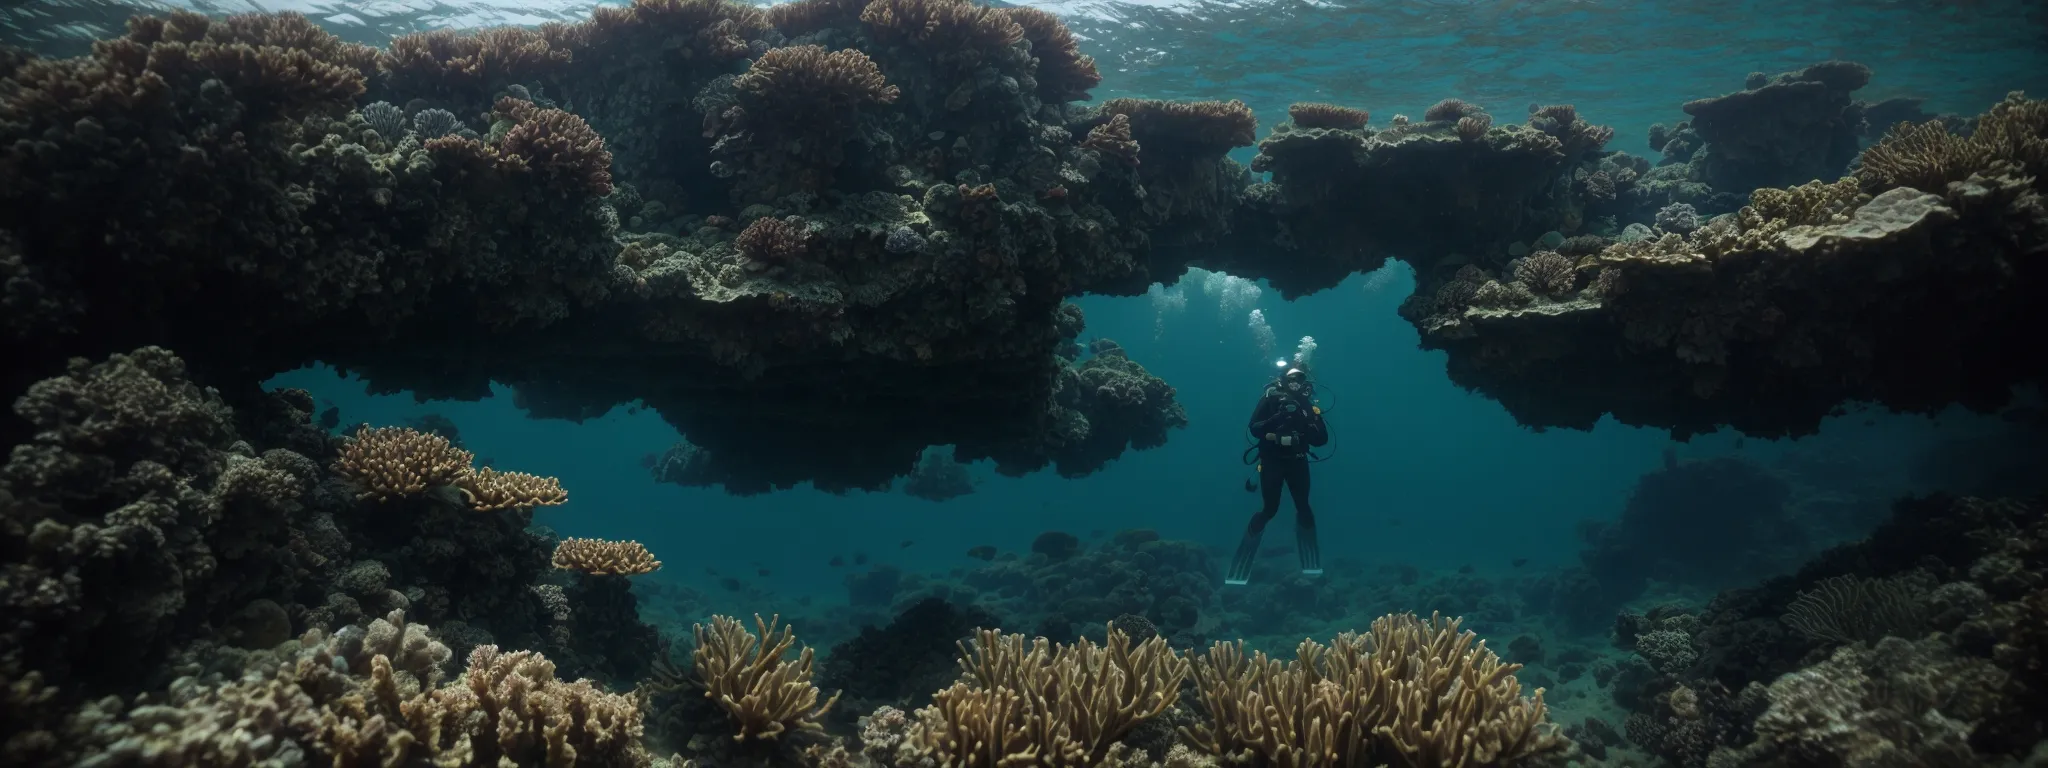 a diver poised above reef-infested waters, ready to plunge into the depths.